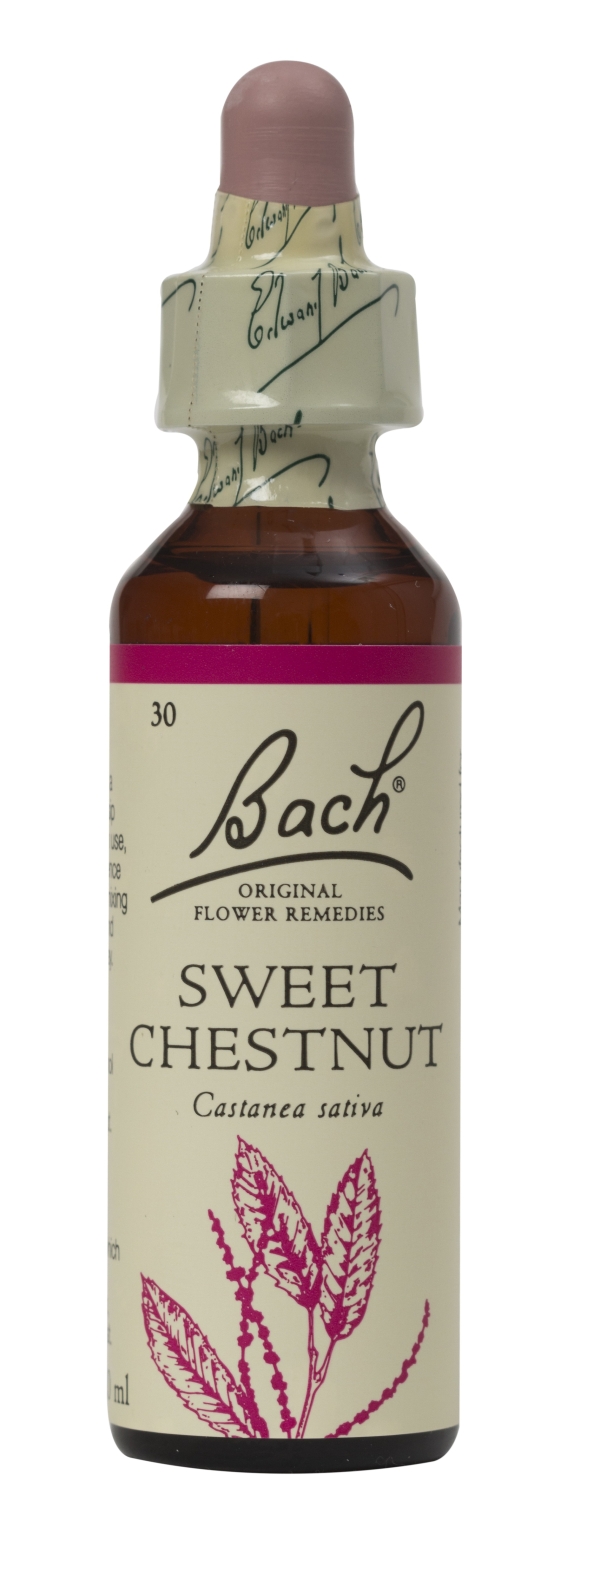 Nelson Bach Flower Remedies: Bach Sweet Chestnut Flower Remedy (20ml) available online here